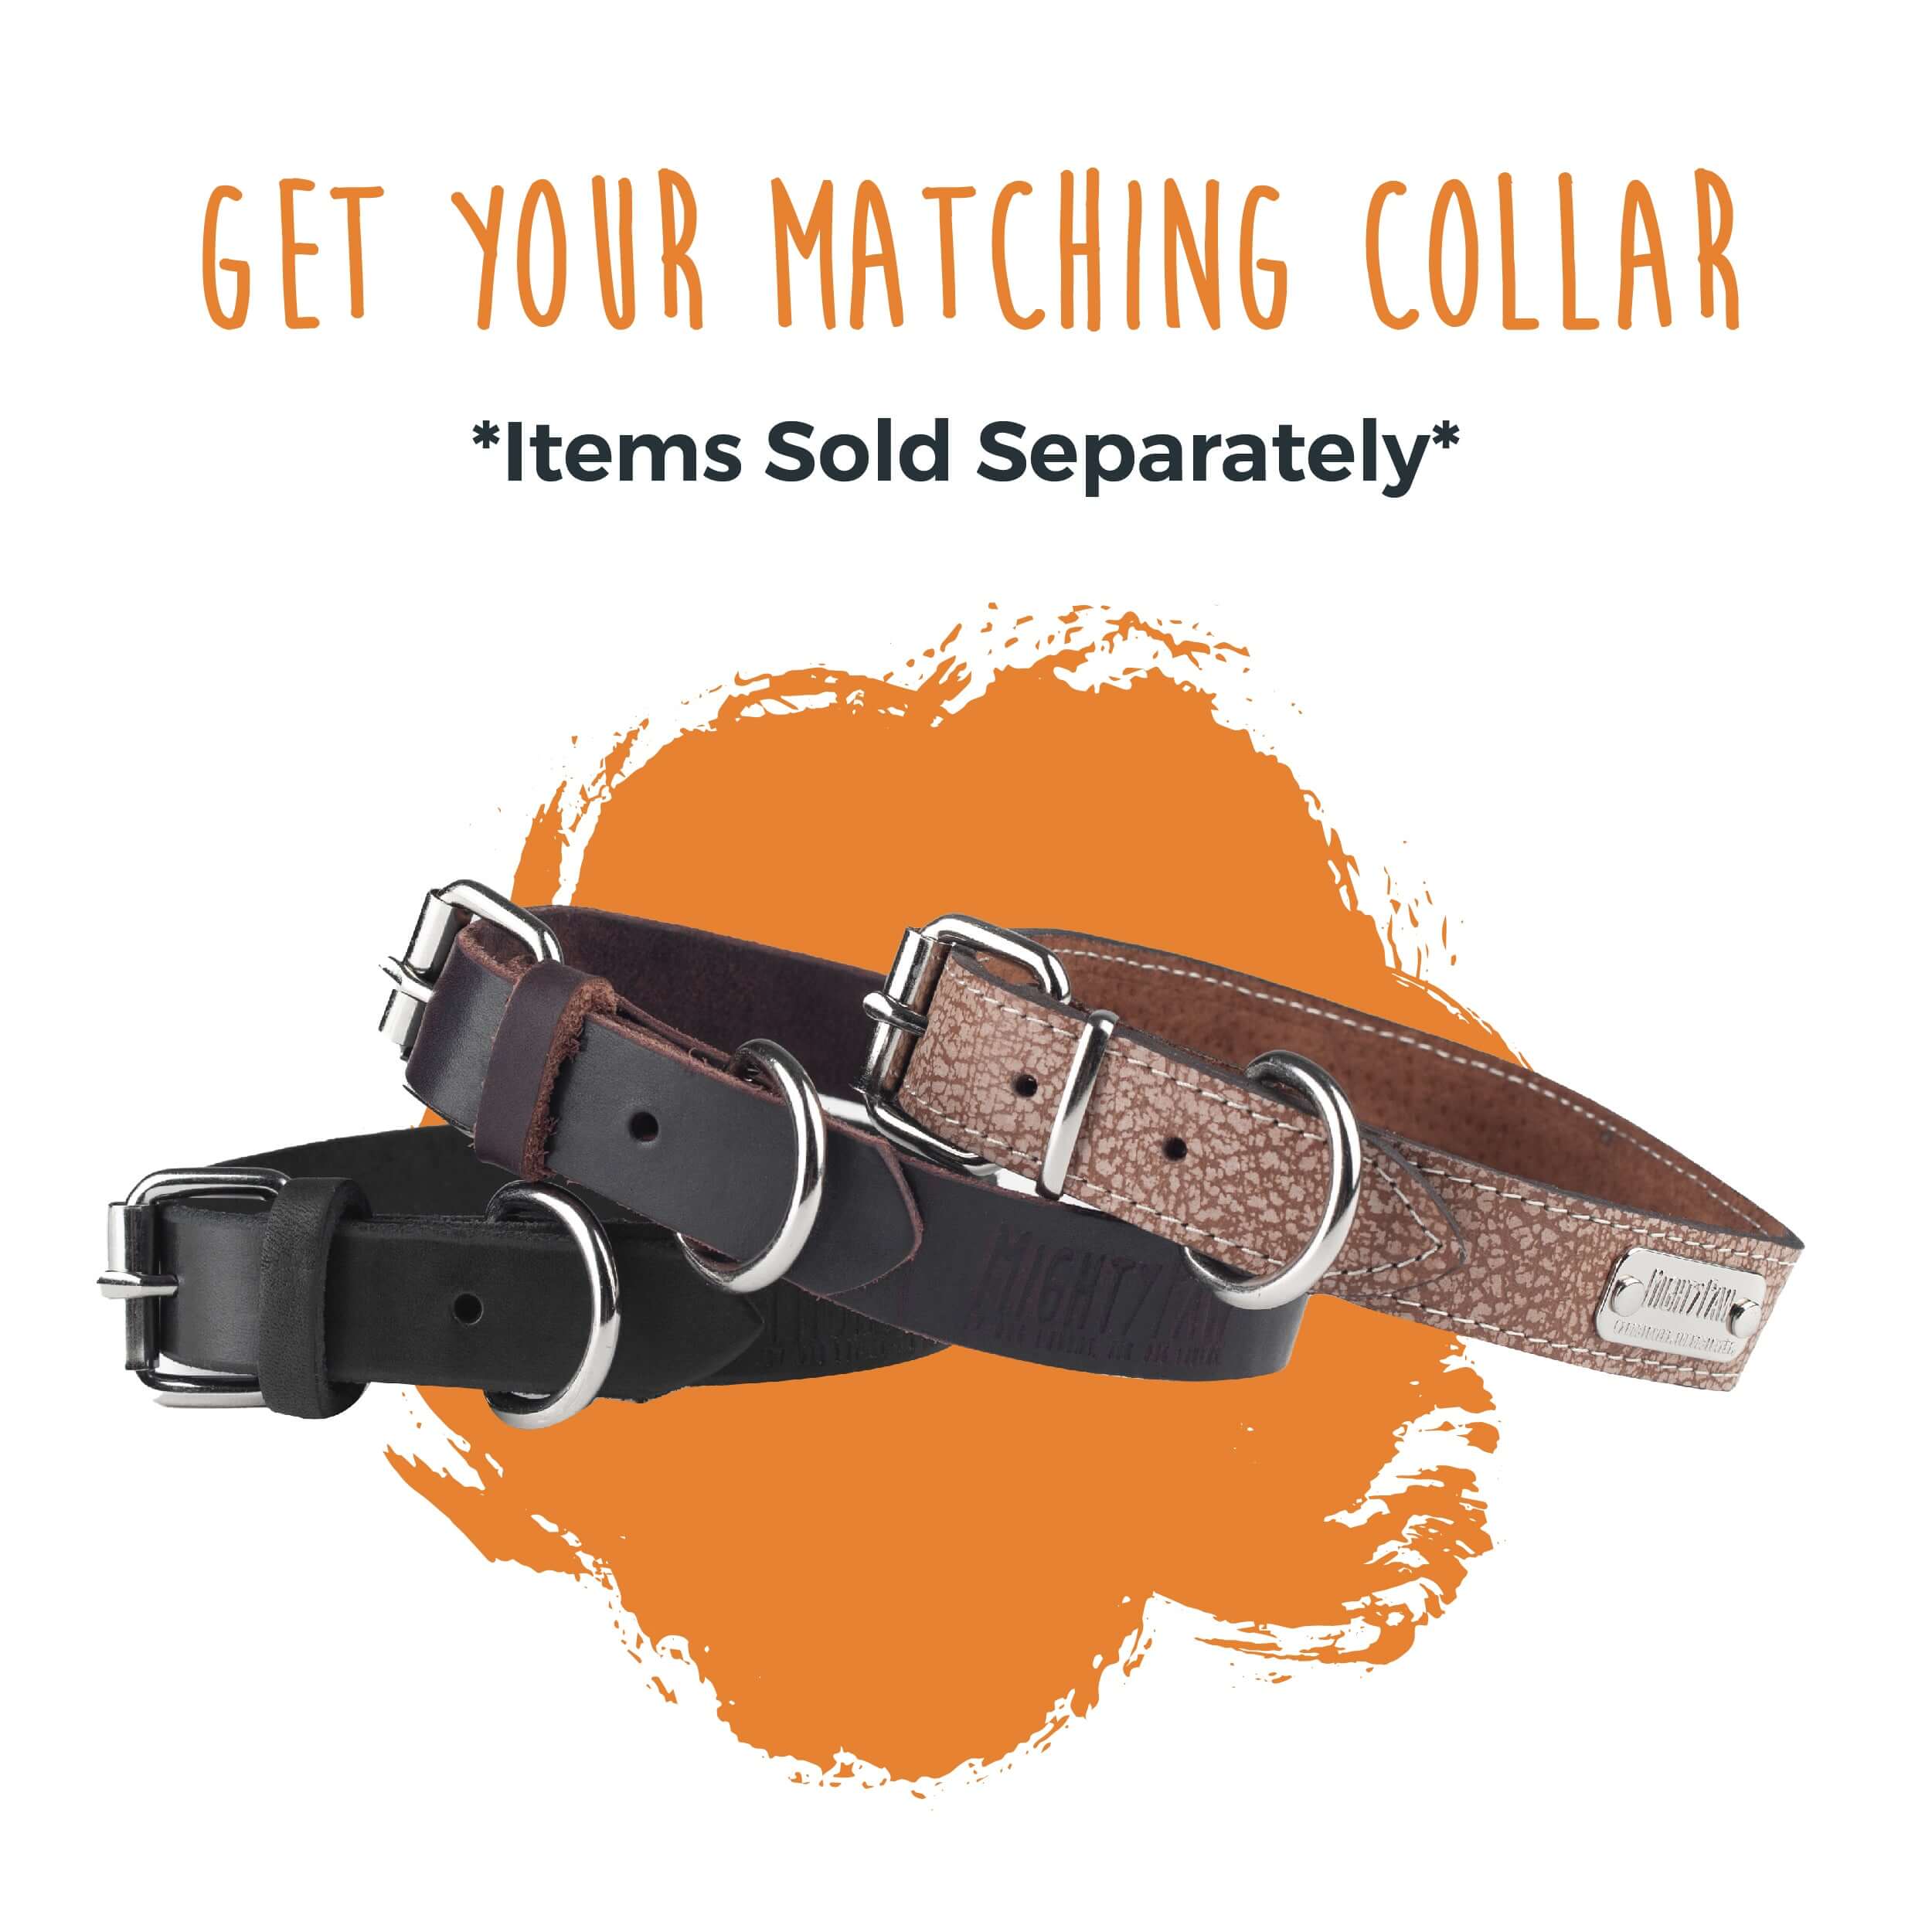 Mighty Paw Distressed Leather Dog Collar with Silver Hardware